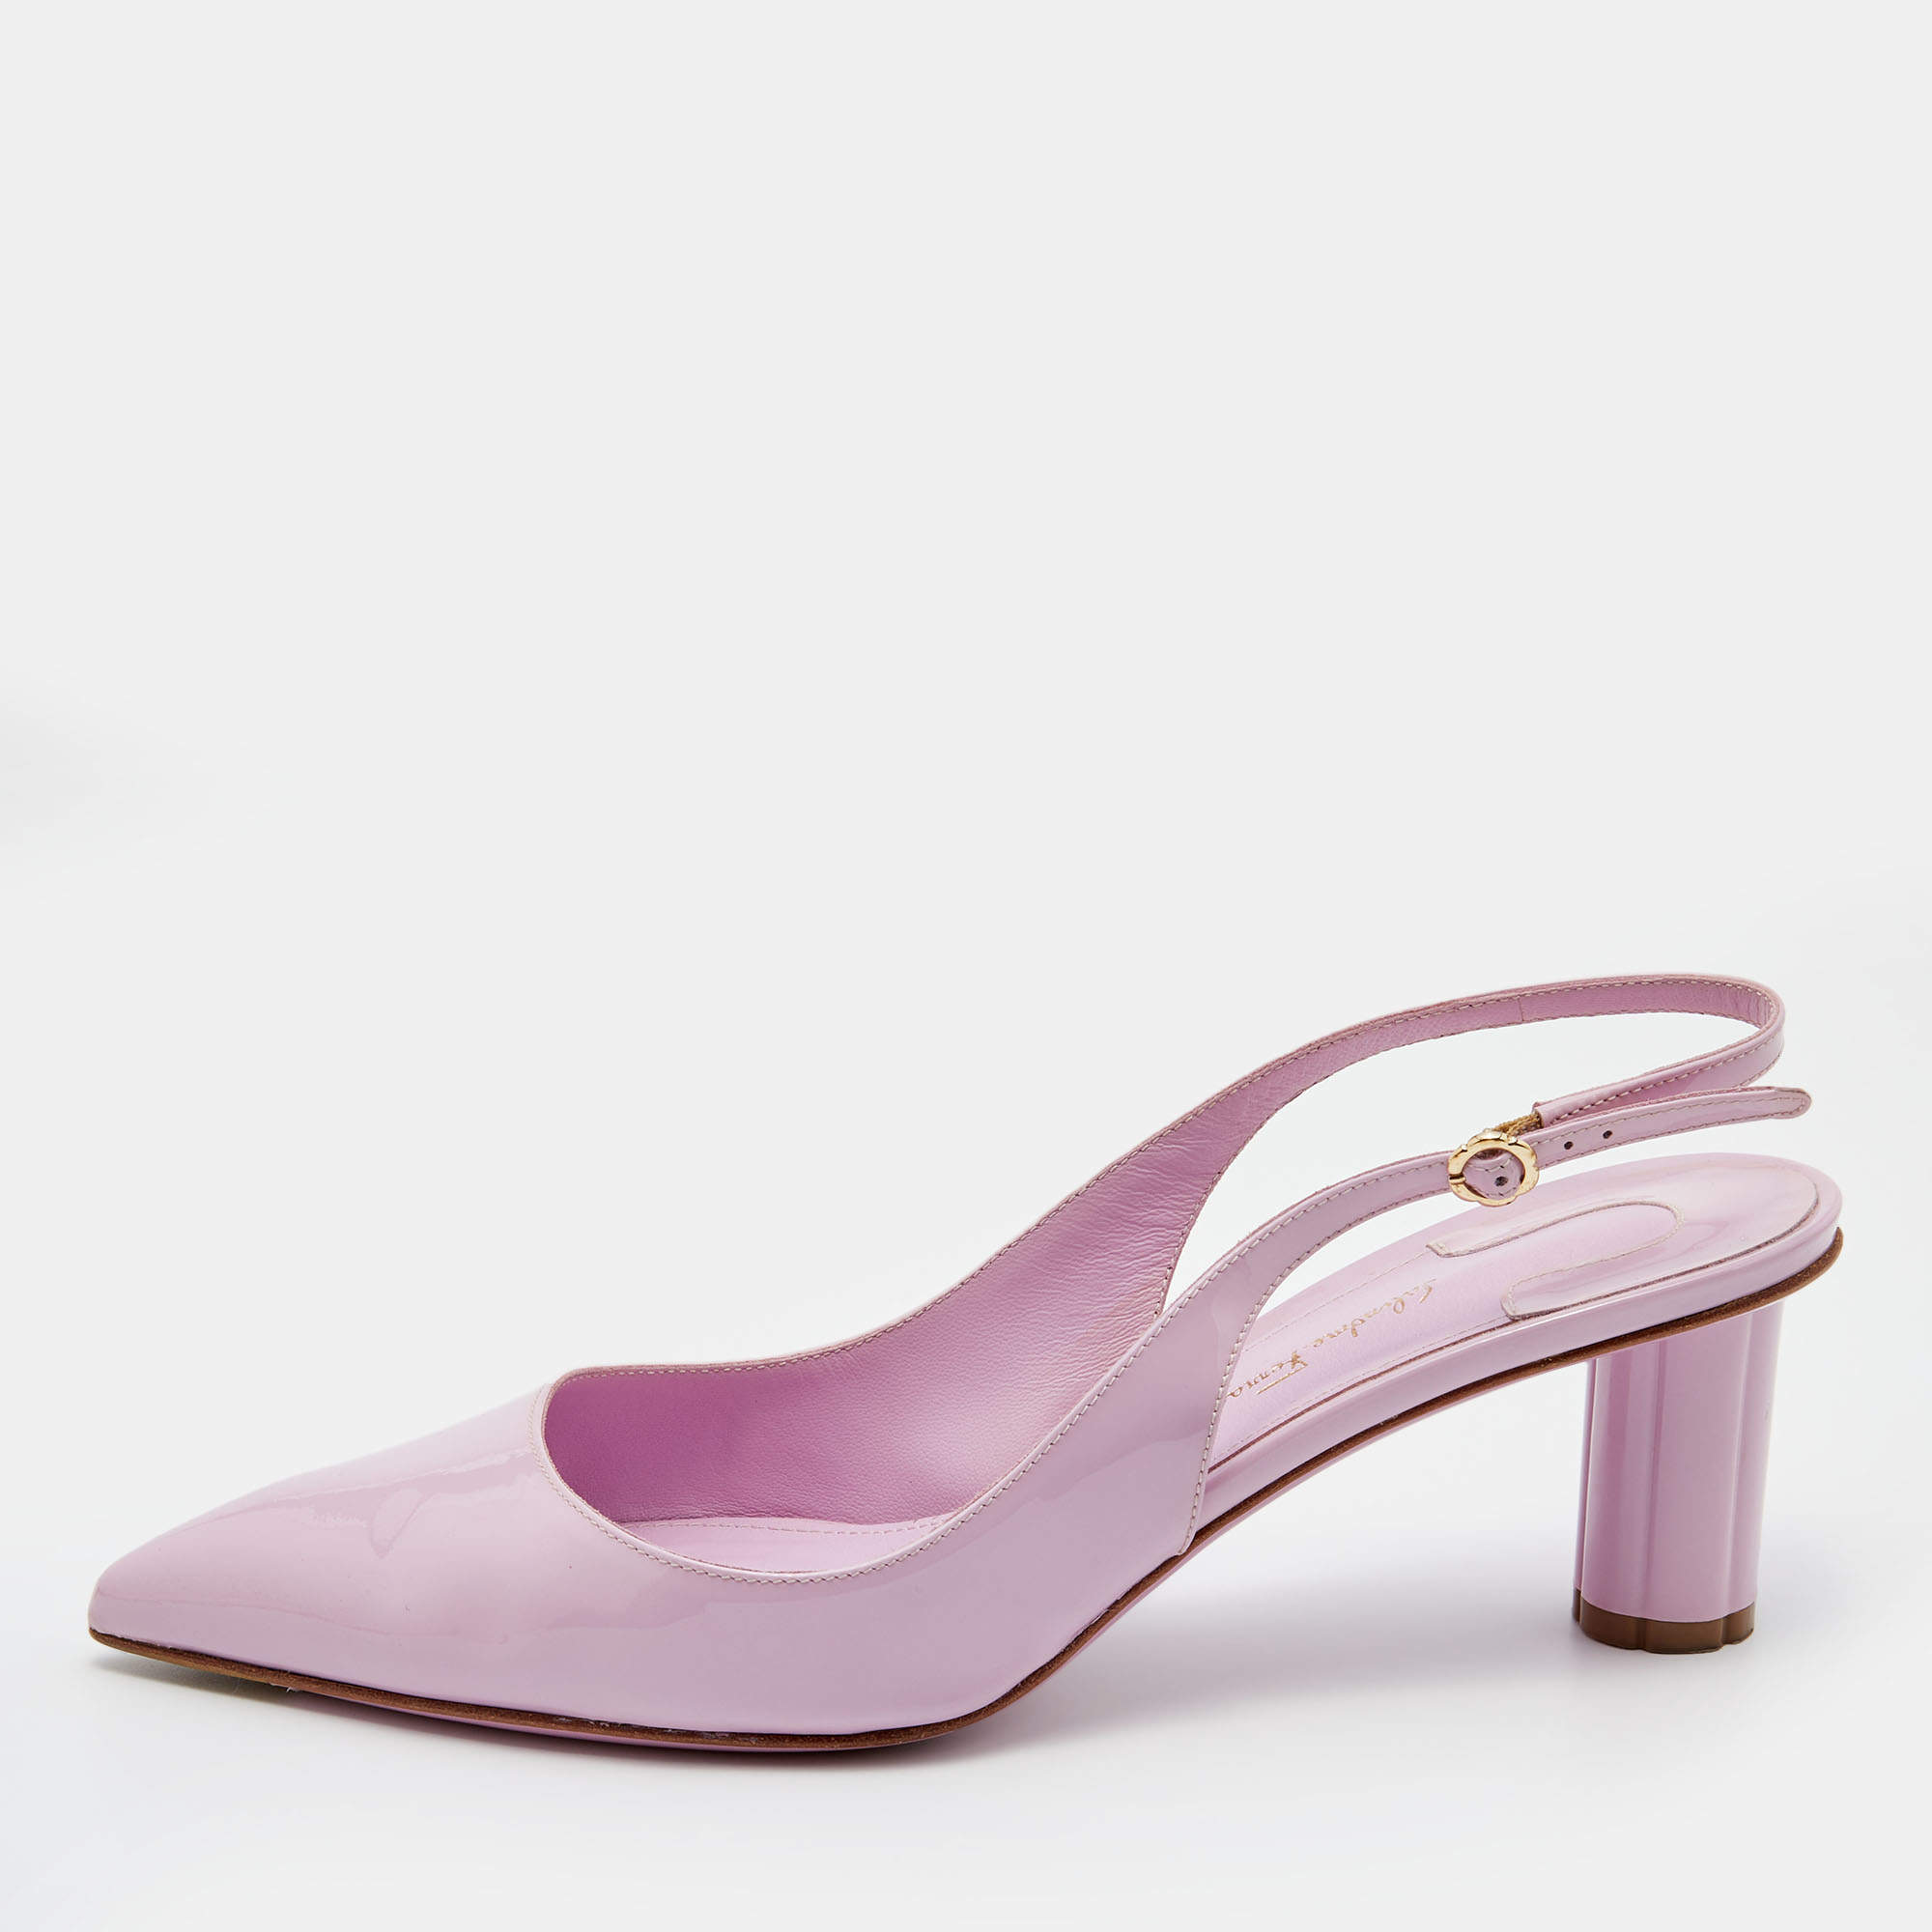 Patent leather heels Prada Pink size 38 EU in Patent leather